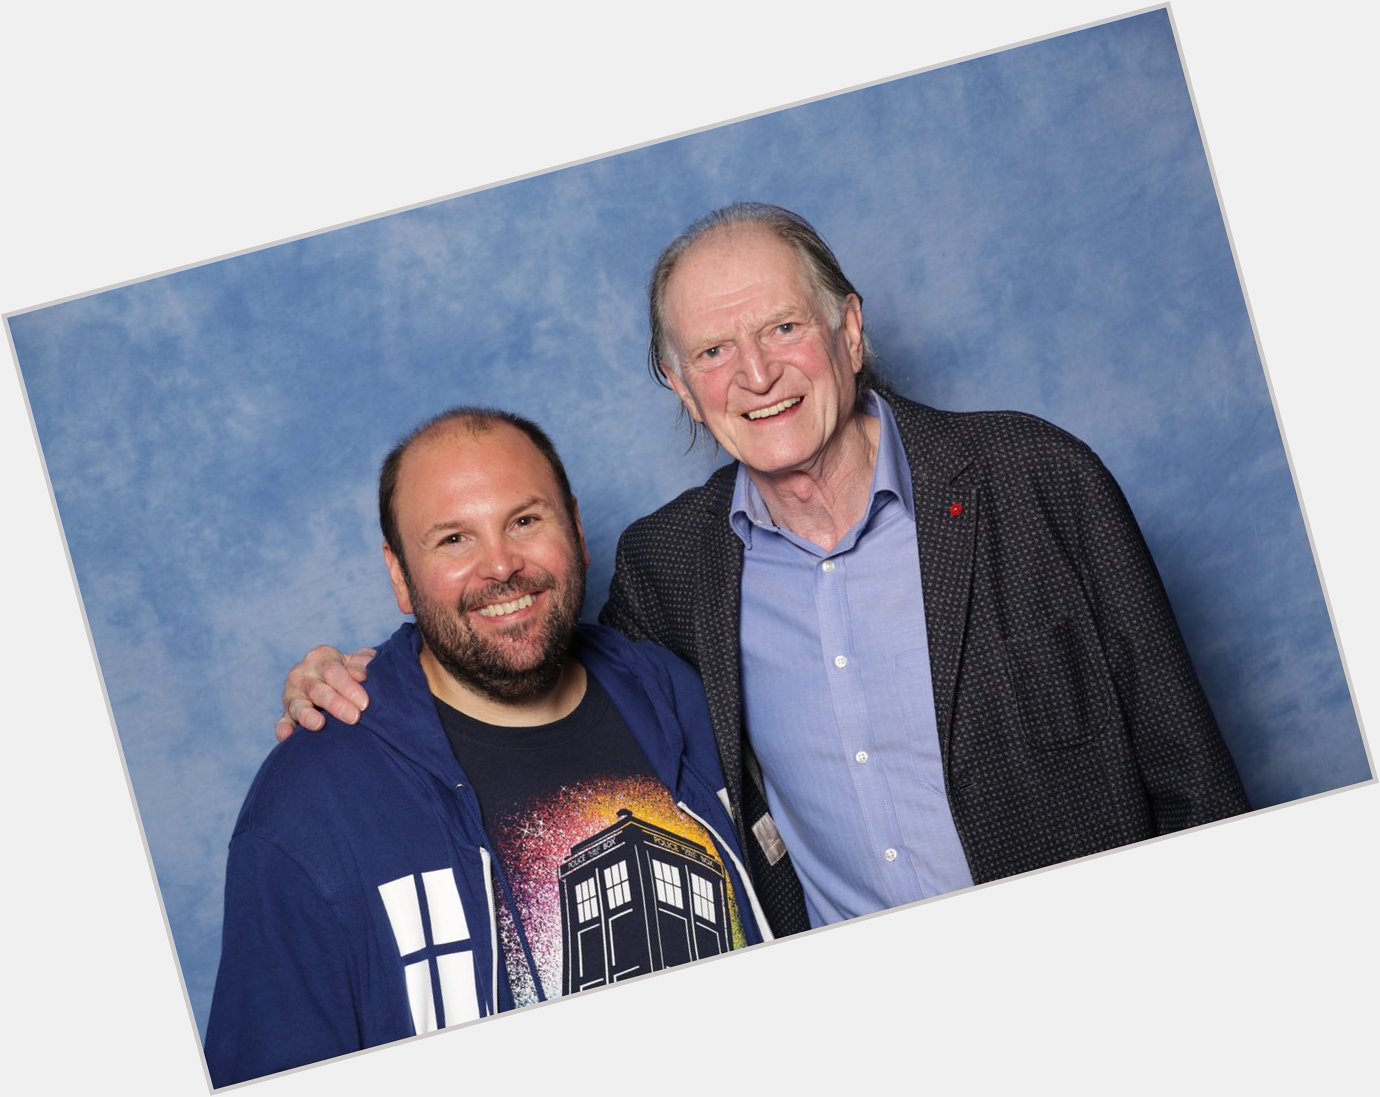 Happy Birthday to the wonderful David Bradley, 78 Earth years old today! 